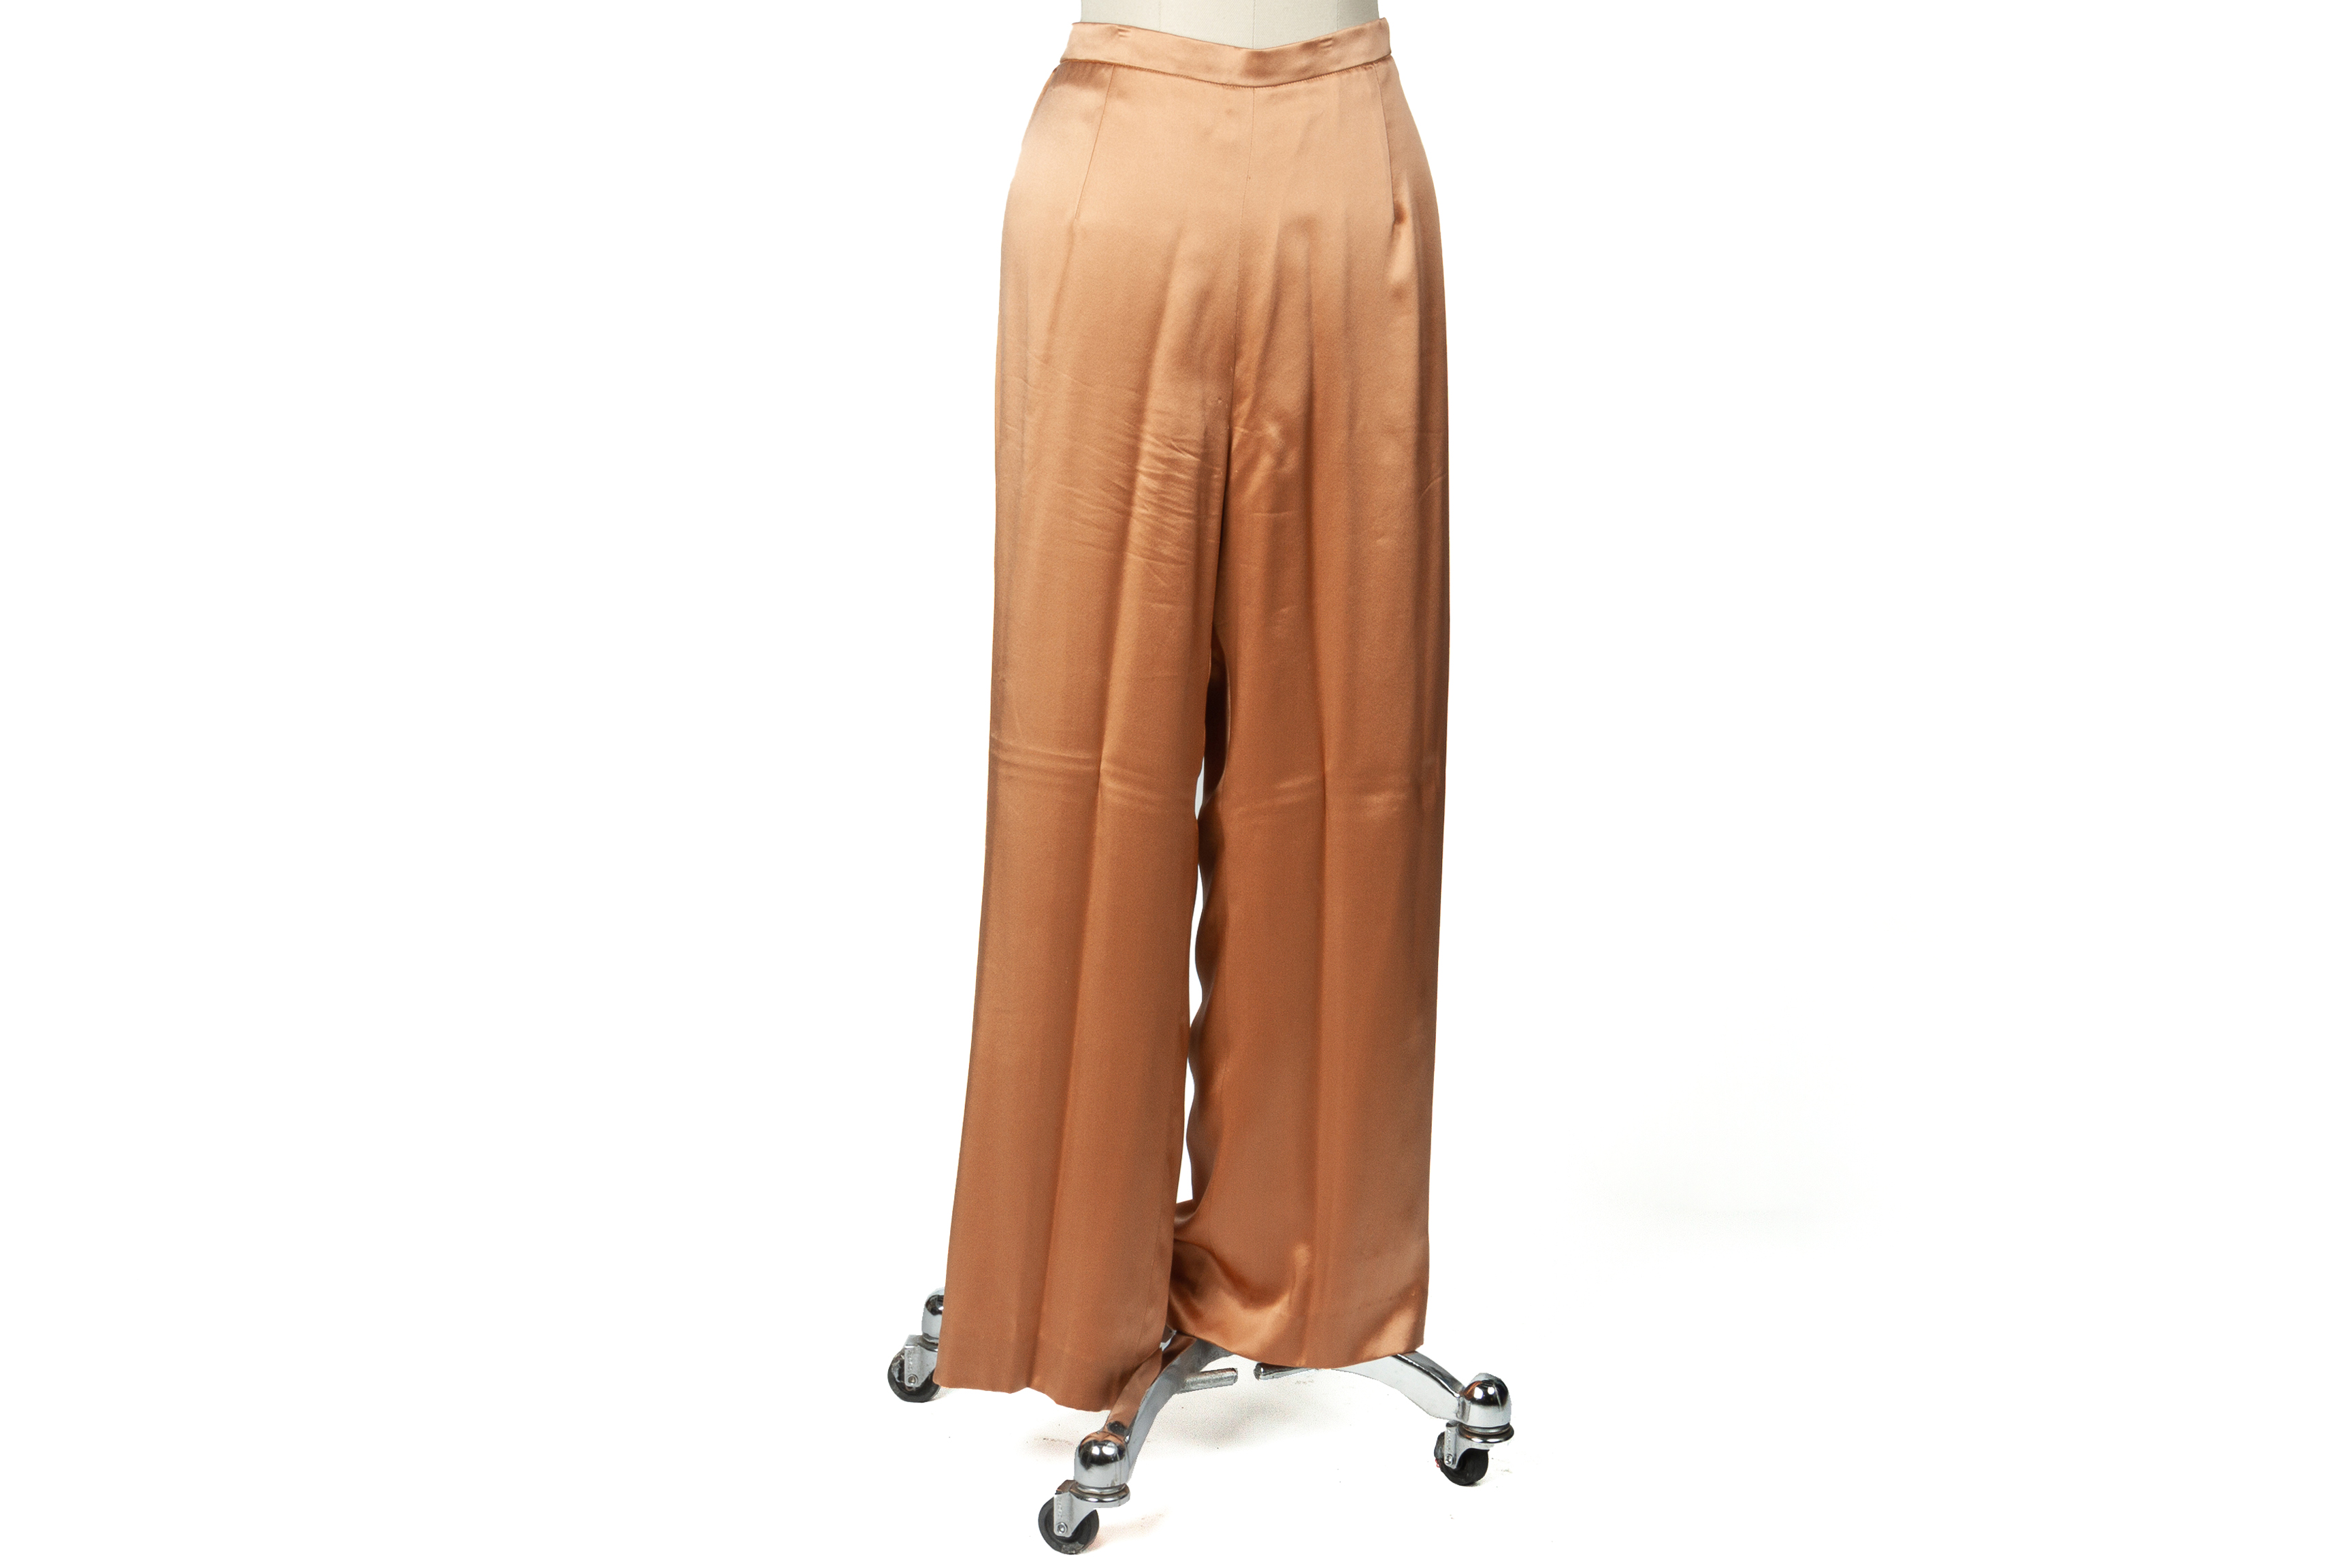 A SHANGHAI TANG ORANGE/BROWN COLLARED TOP AND TROUSER SET - Image 2 of 4